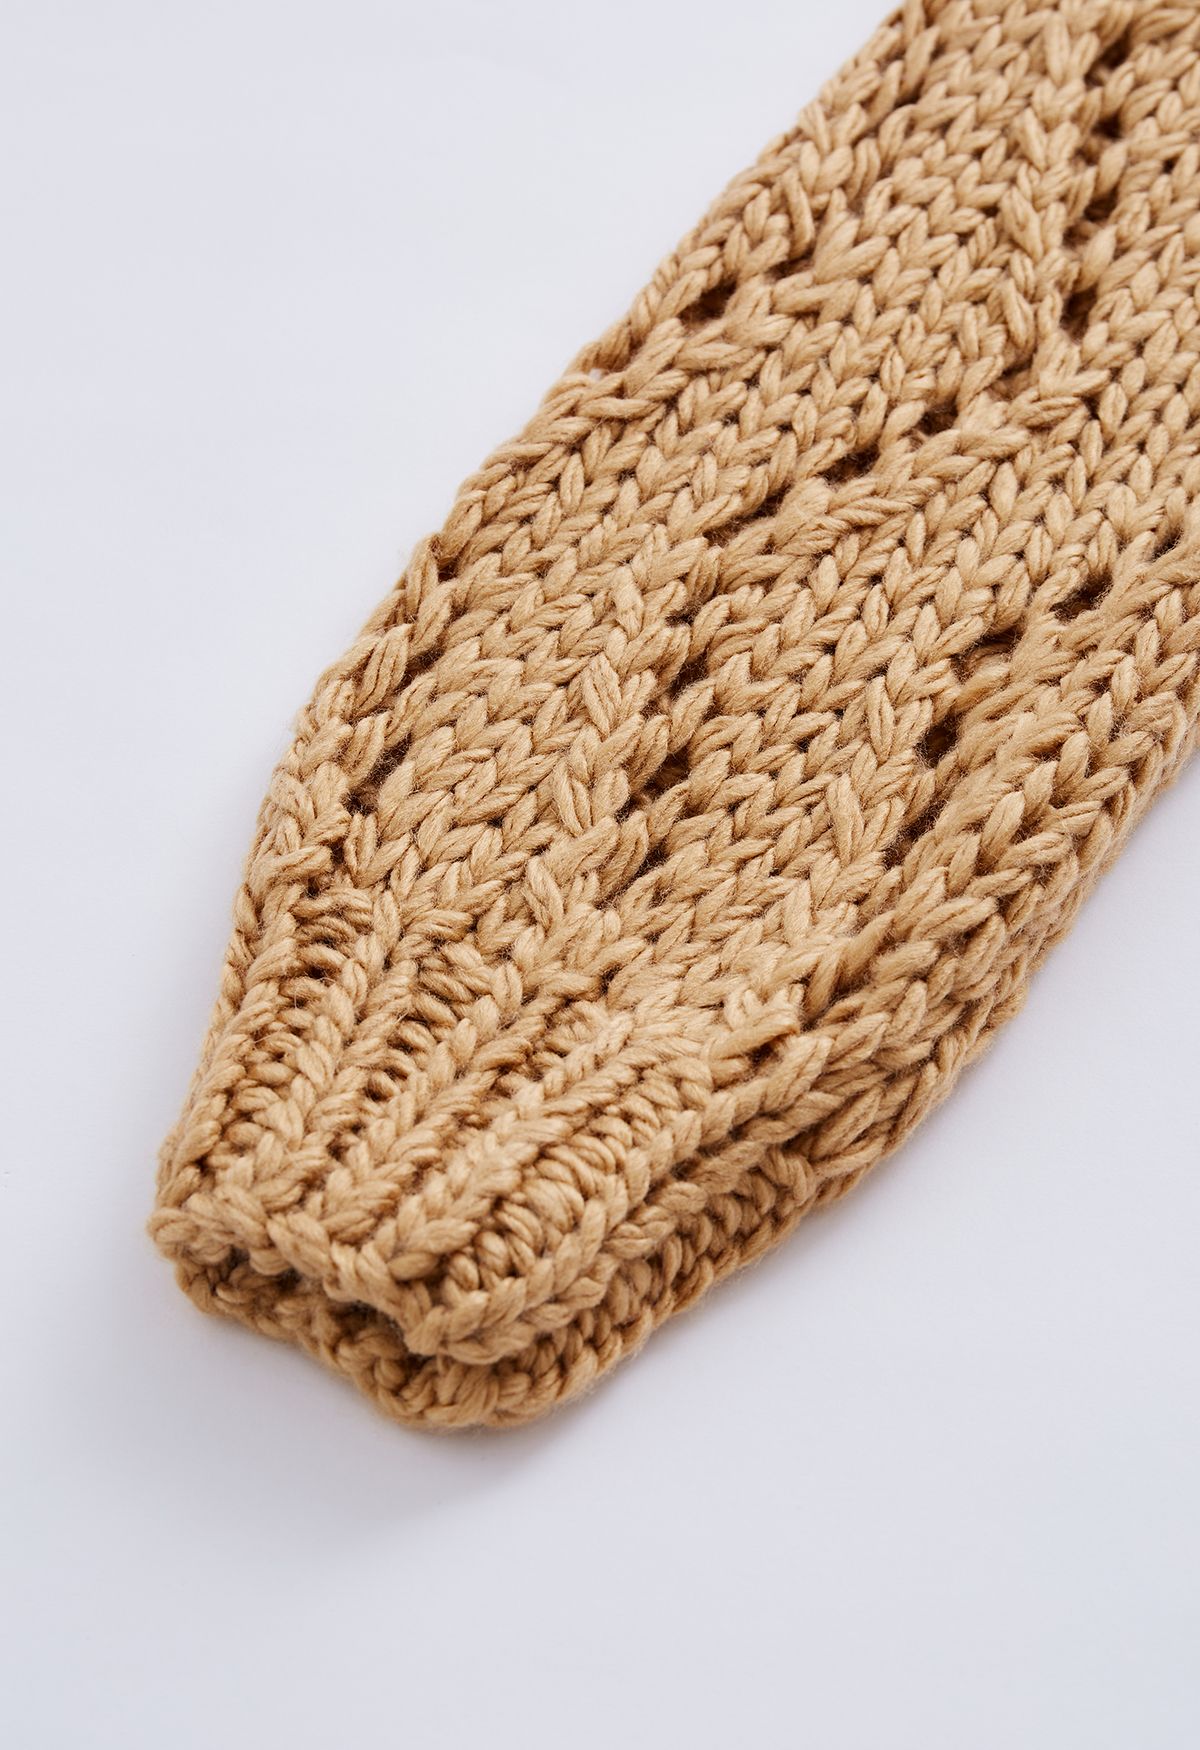 Pointelle Sleeve High Neck Hand-Knit Sweater in Tan